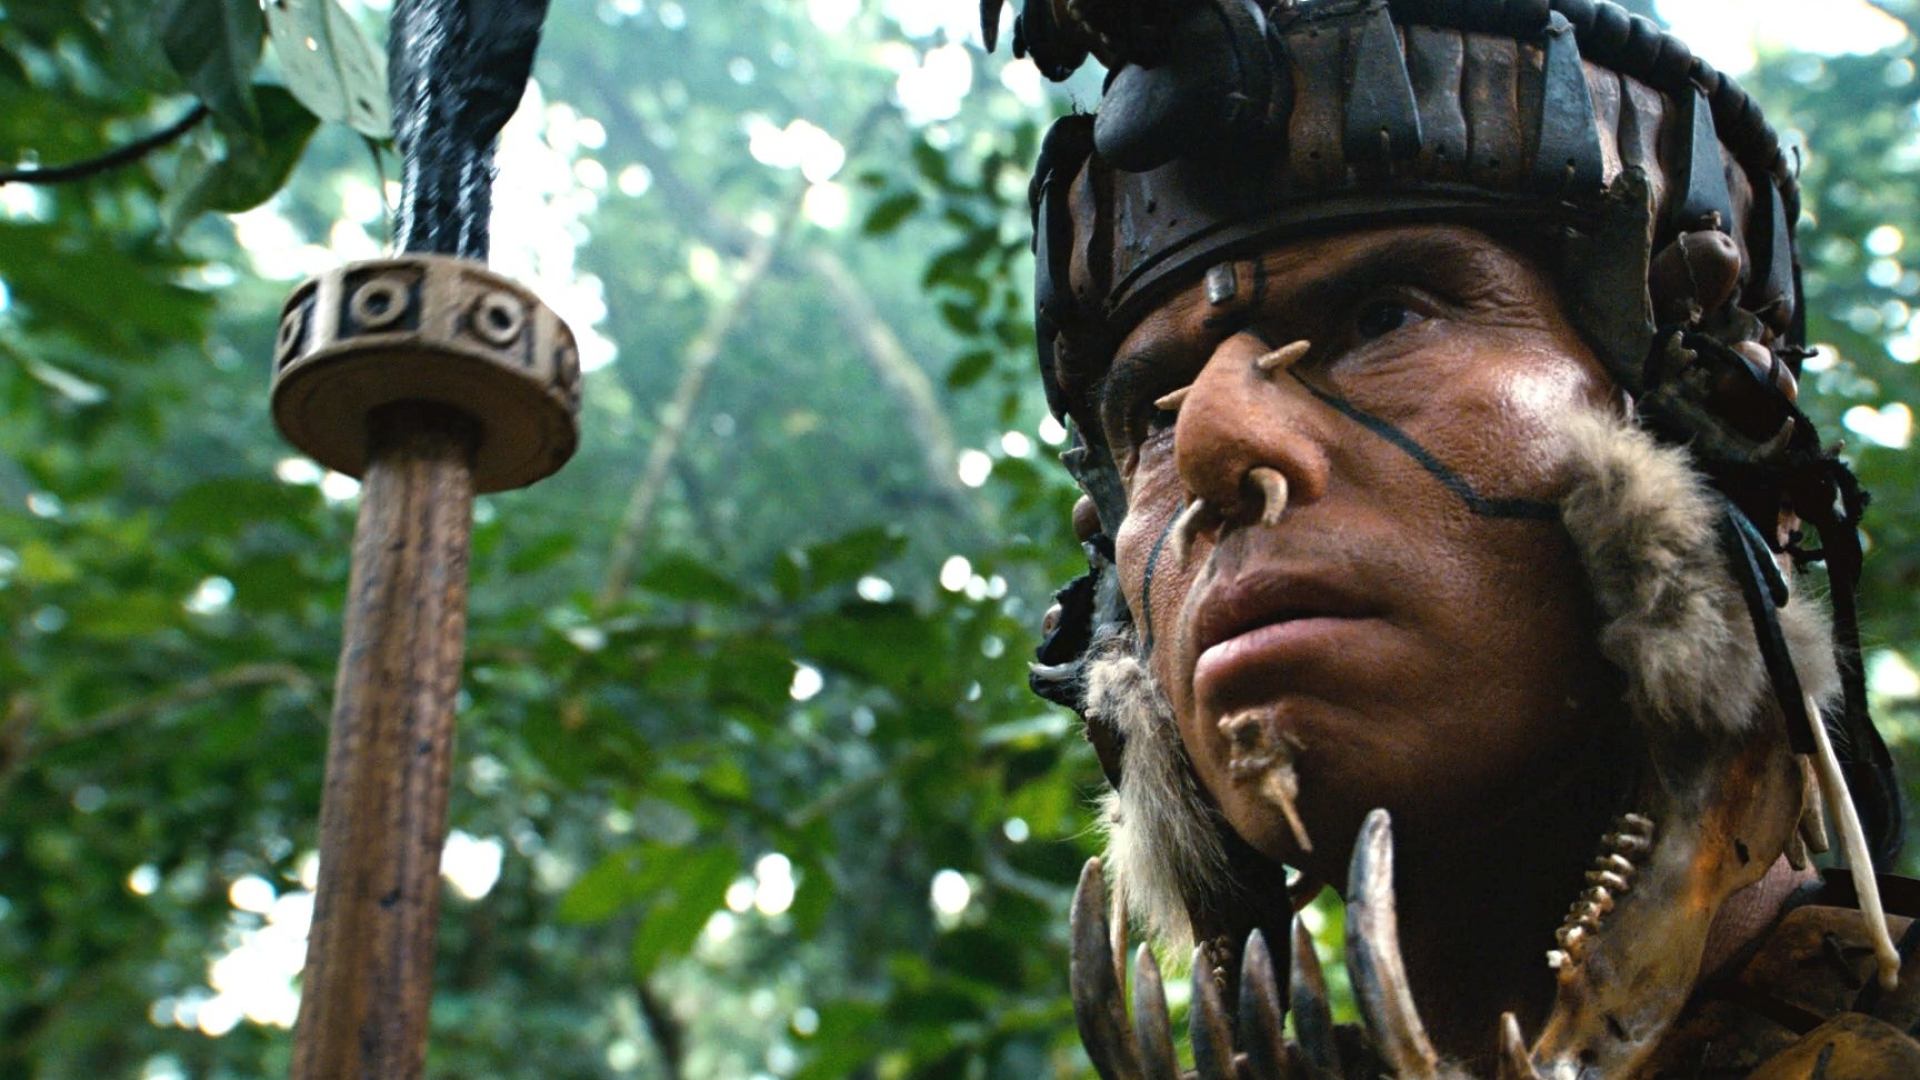 Apocalypto: All dialogue in the film is in a modern approximation of the ancient language of the setting. 1920x1080 Full HD Wallpaper.